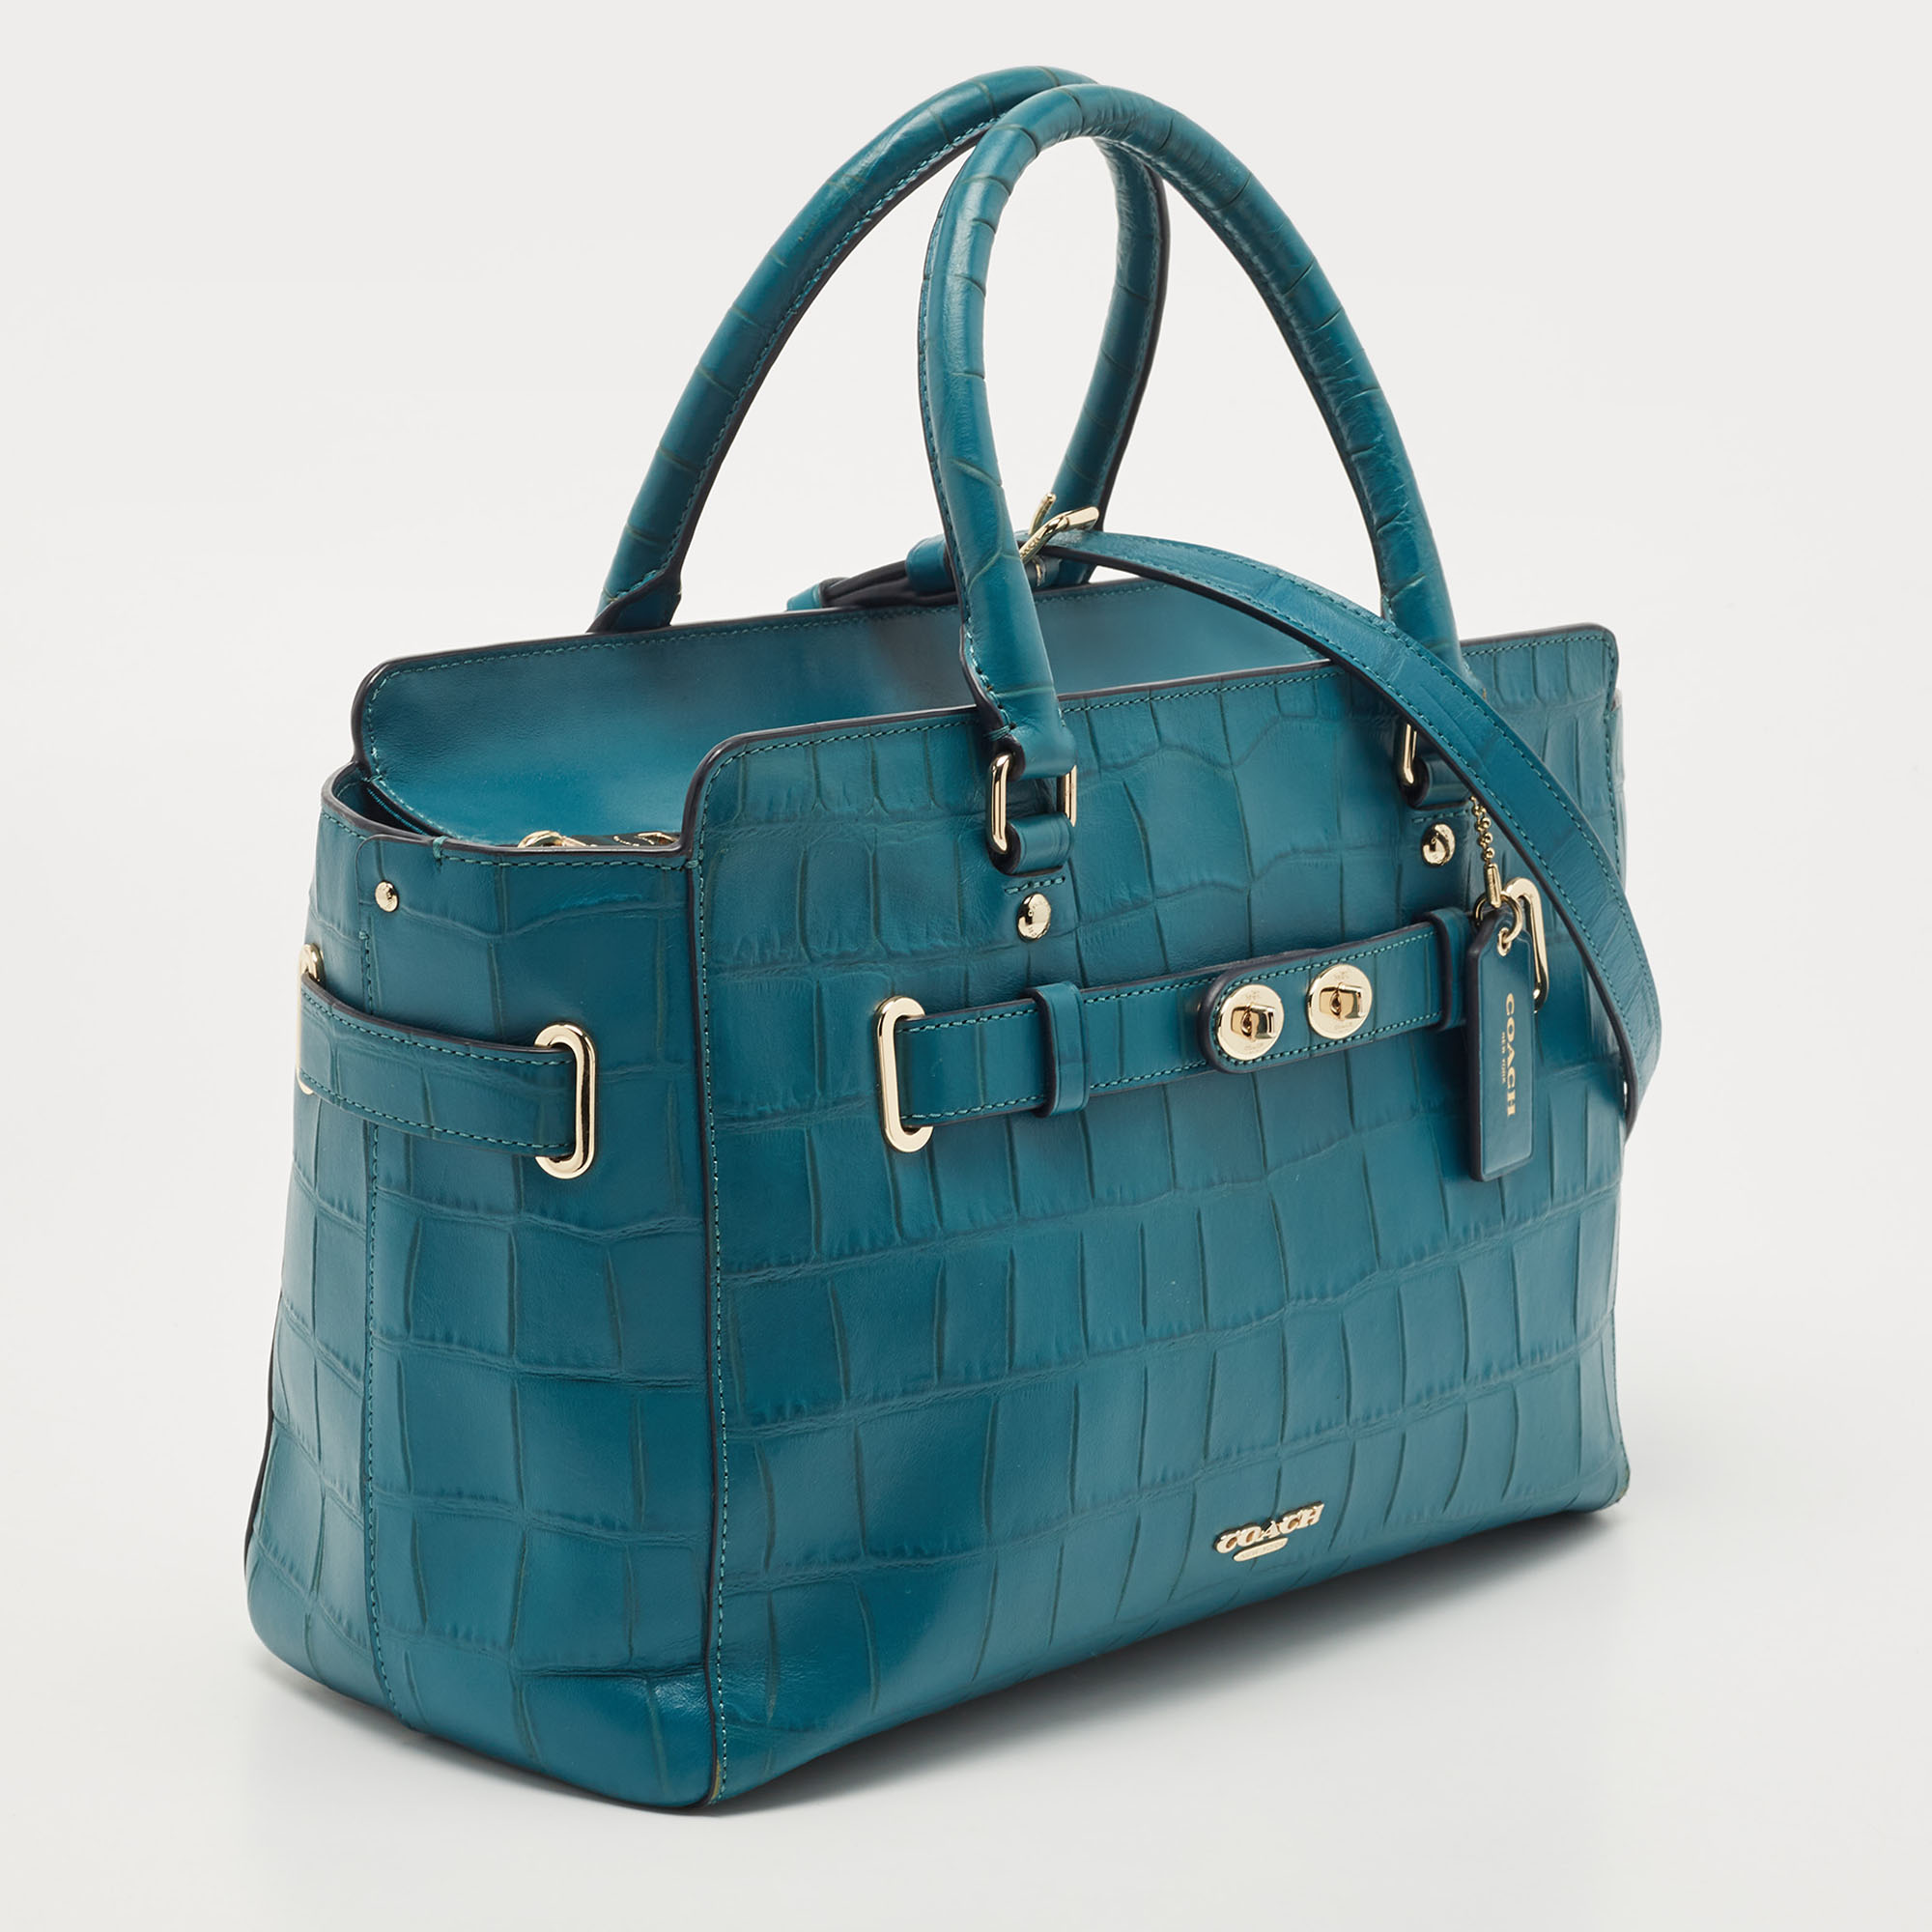 Coach Teal Blue Croc Embossed Leather Swagger 30 Tote